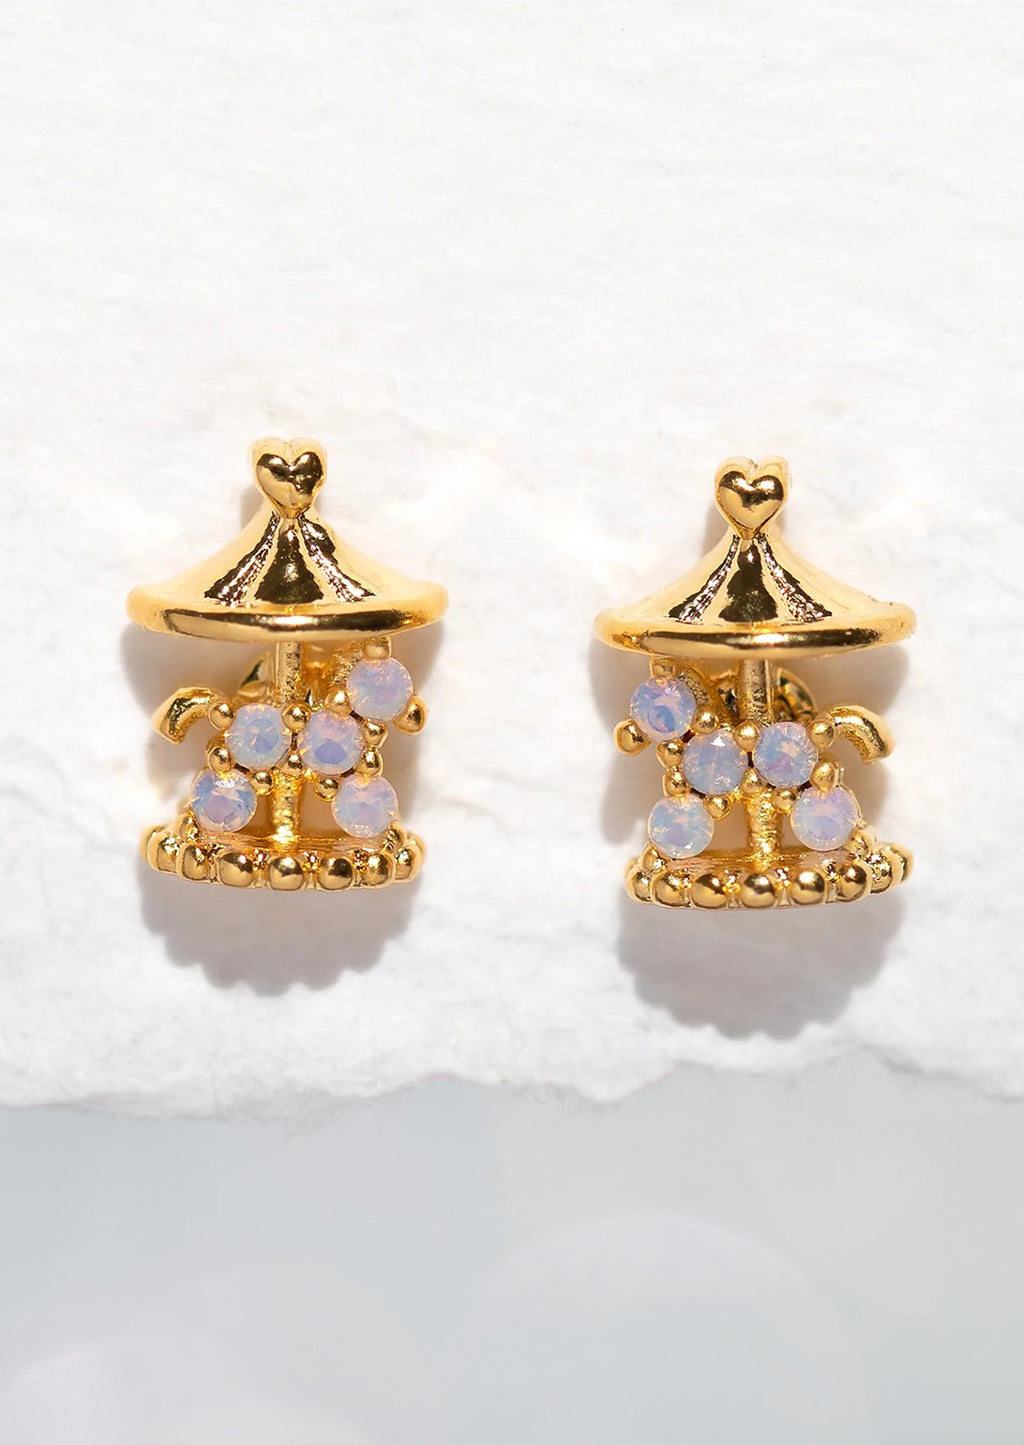 2: A pair of gold stud earrings in shape of carousel.